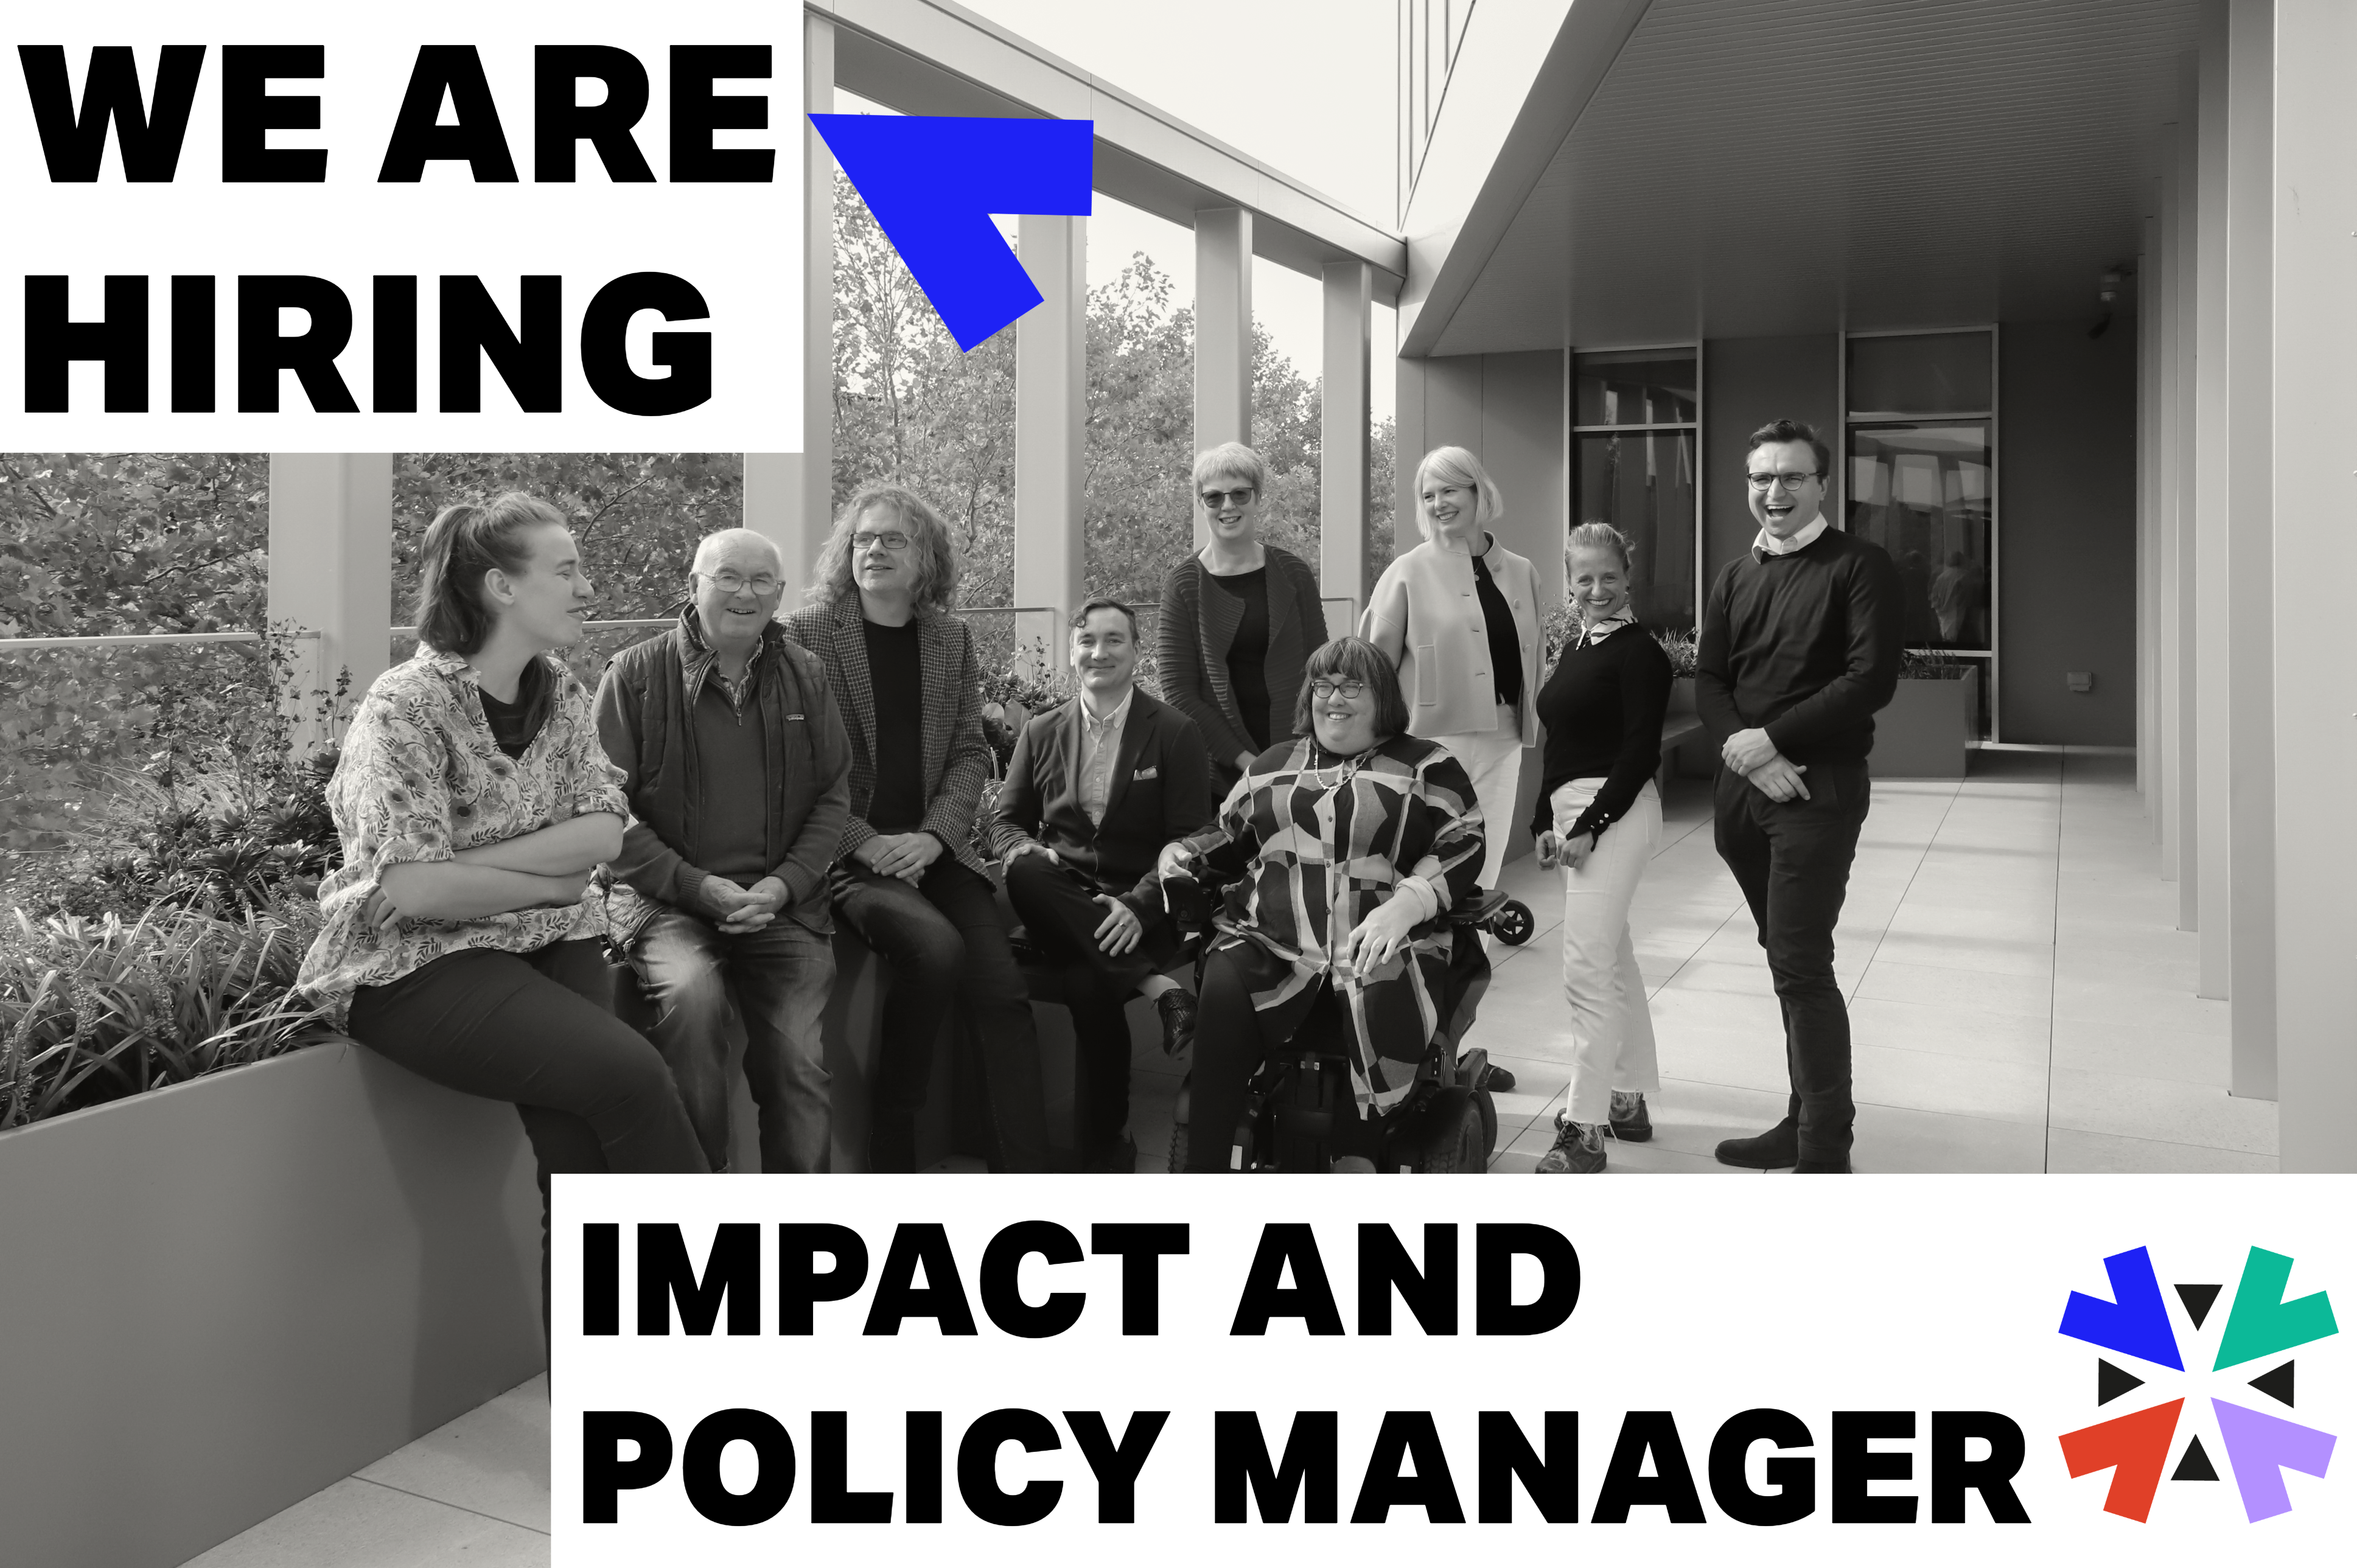 A black and white photo of members of the team standing in a corridor posing for a photo. Caption reads: we are hiring, impact and policy manager